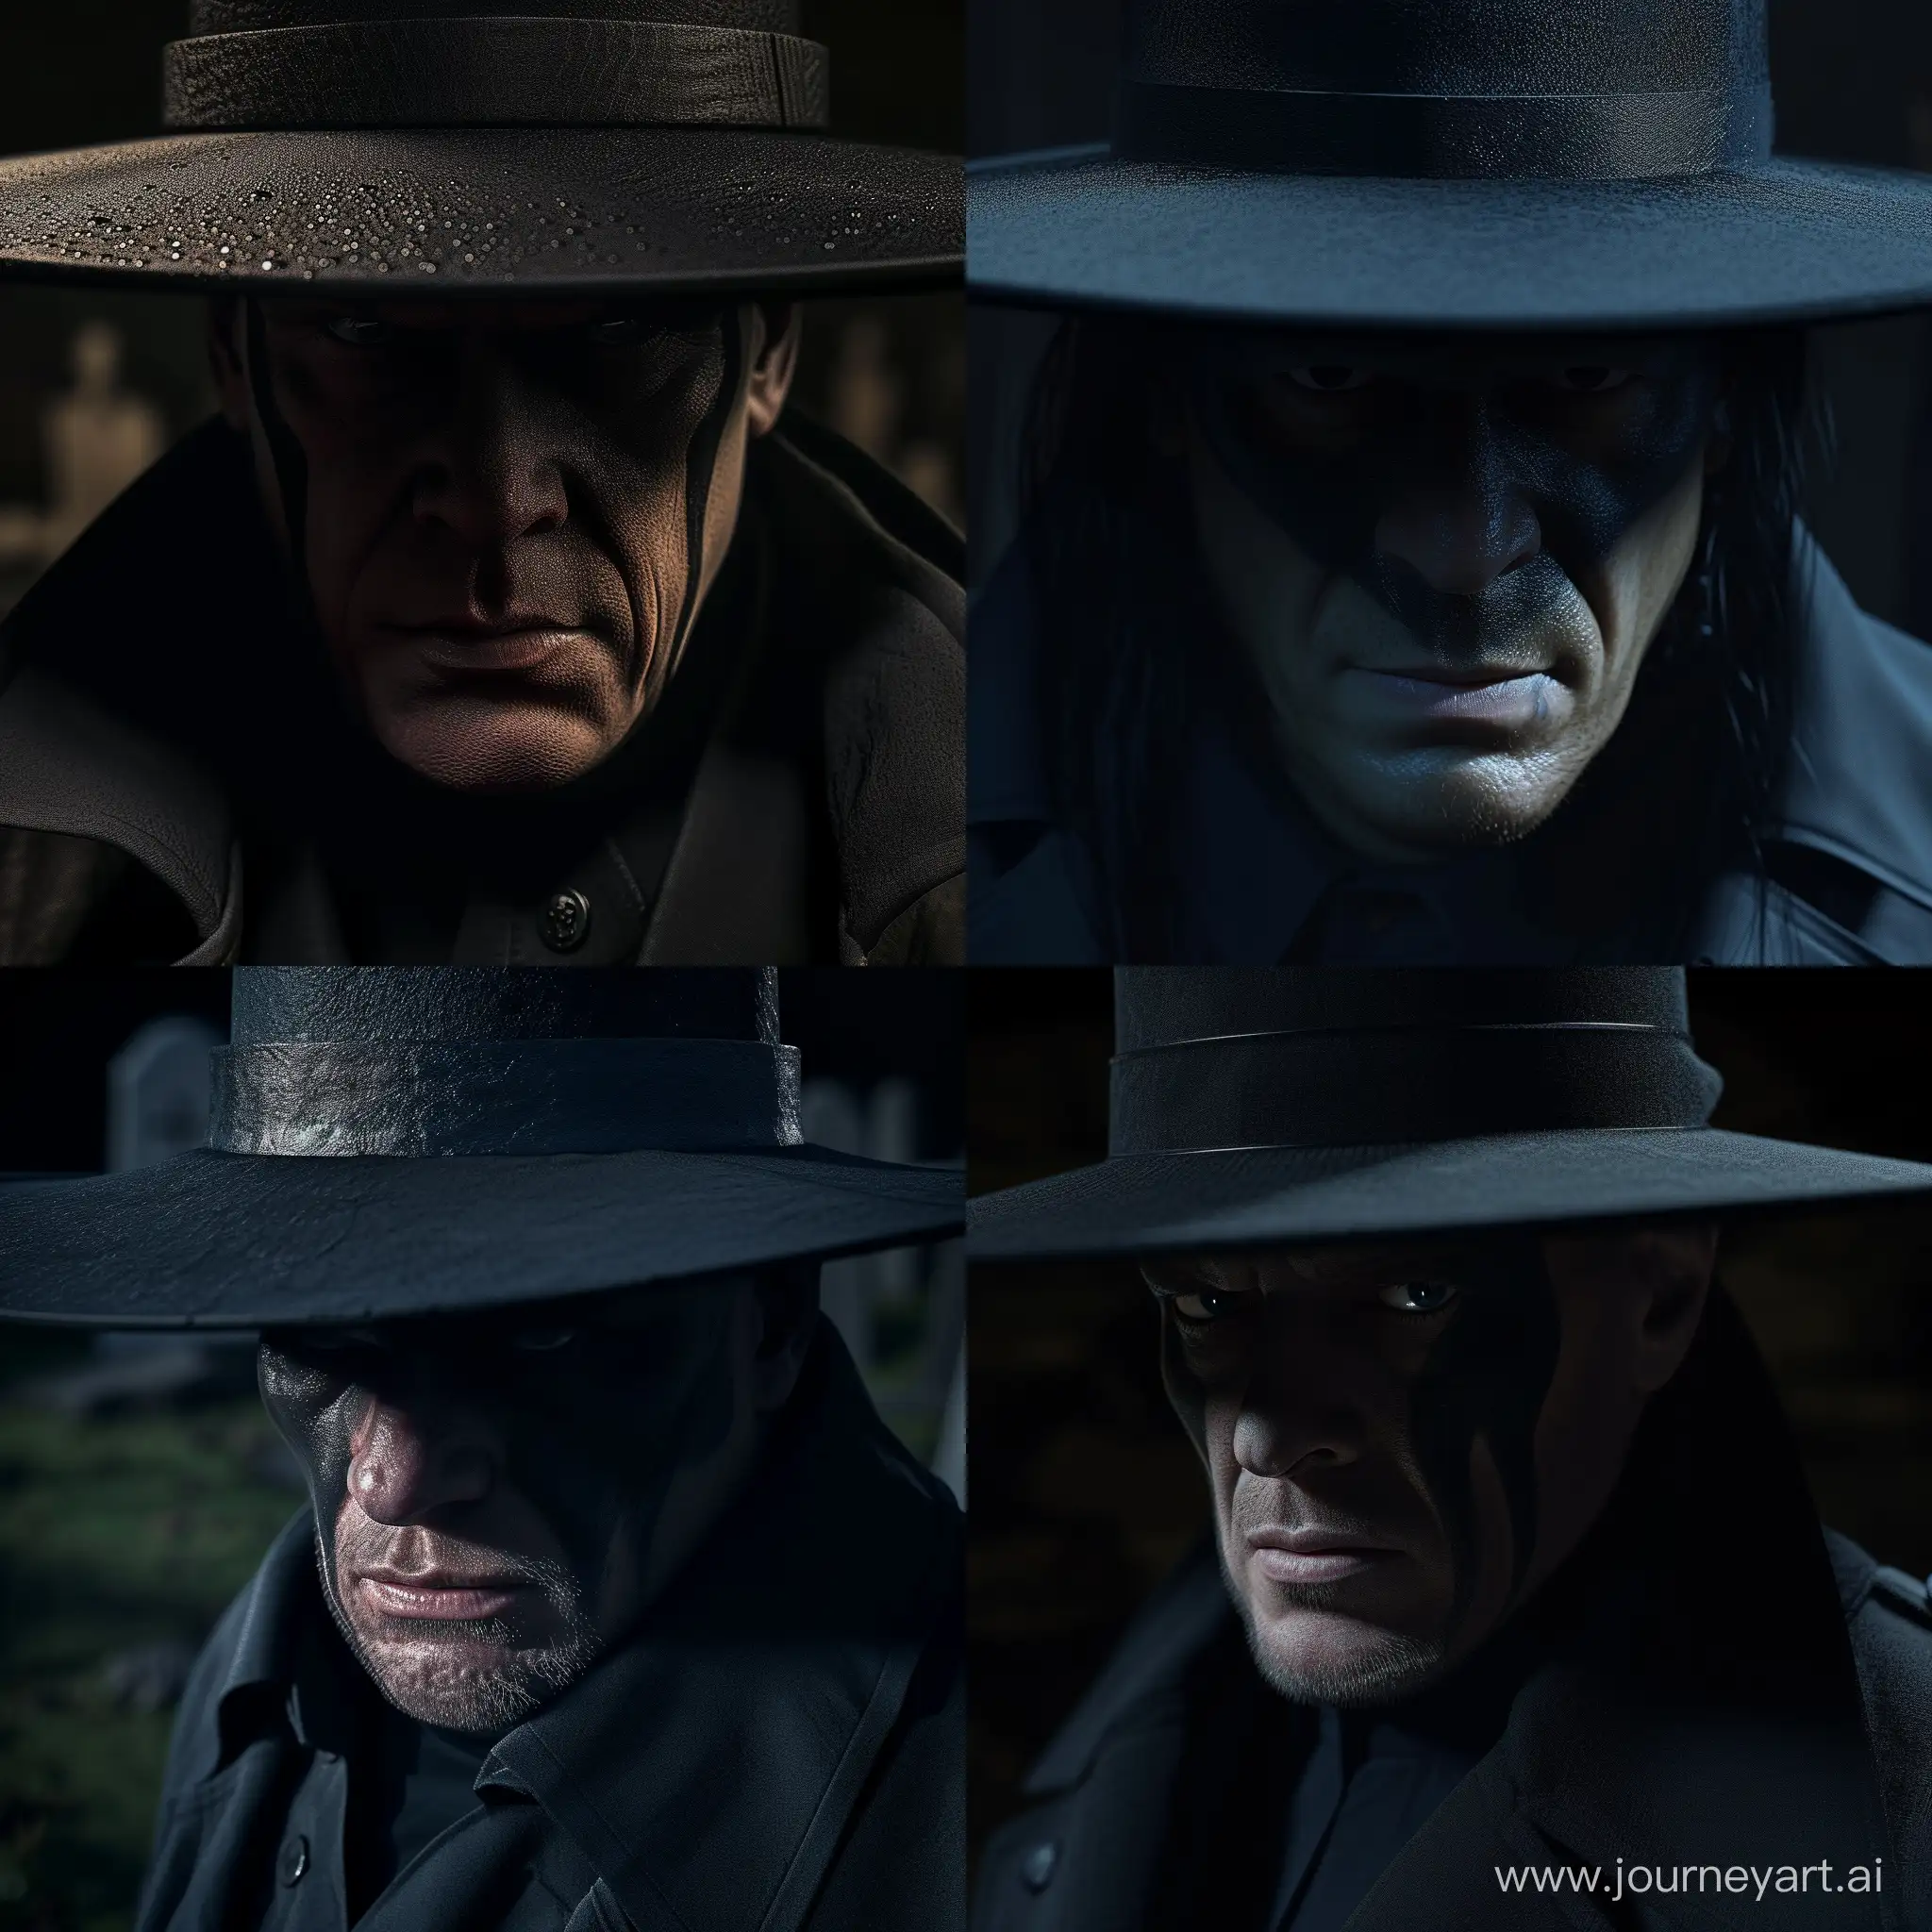 WWE superstar The Undertaker at the dark graveyard. Wearing his iconic black hat and trench coat. Close up to his face. Realistic image.